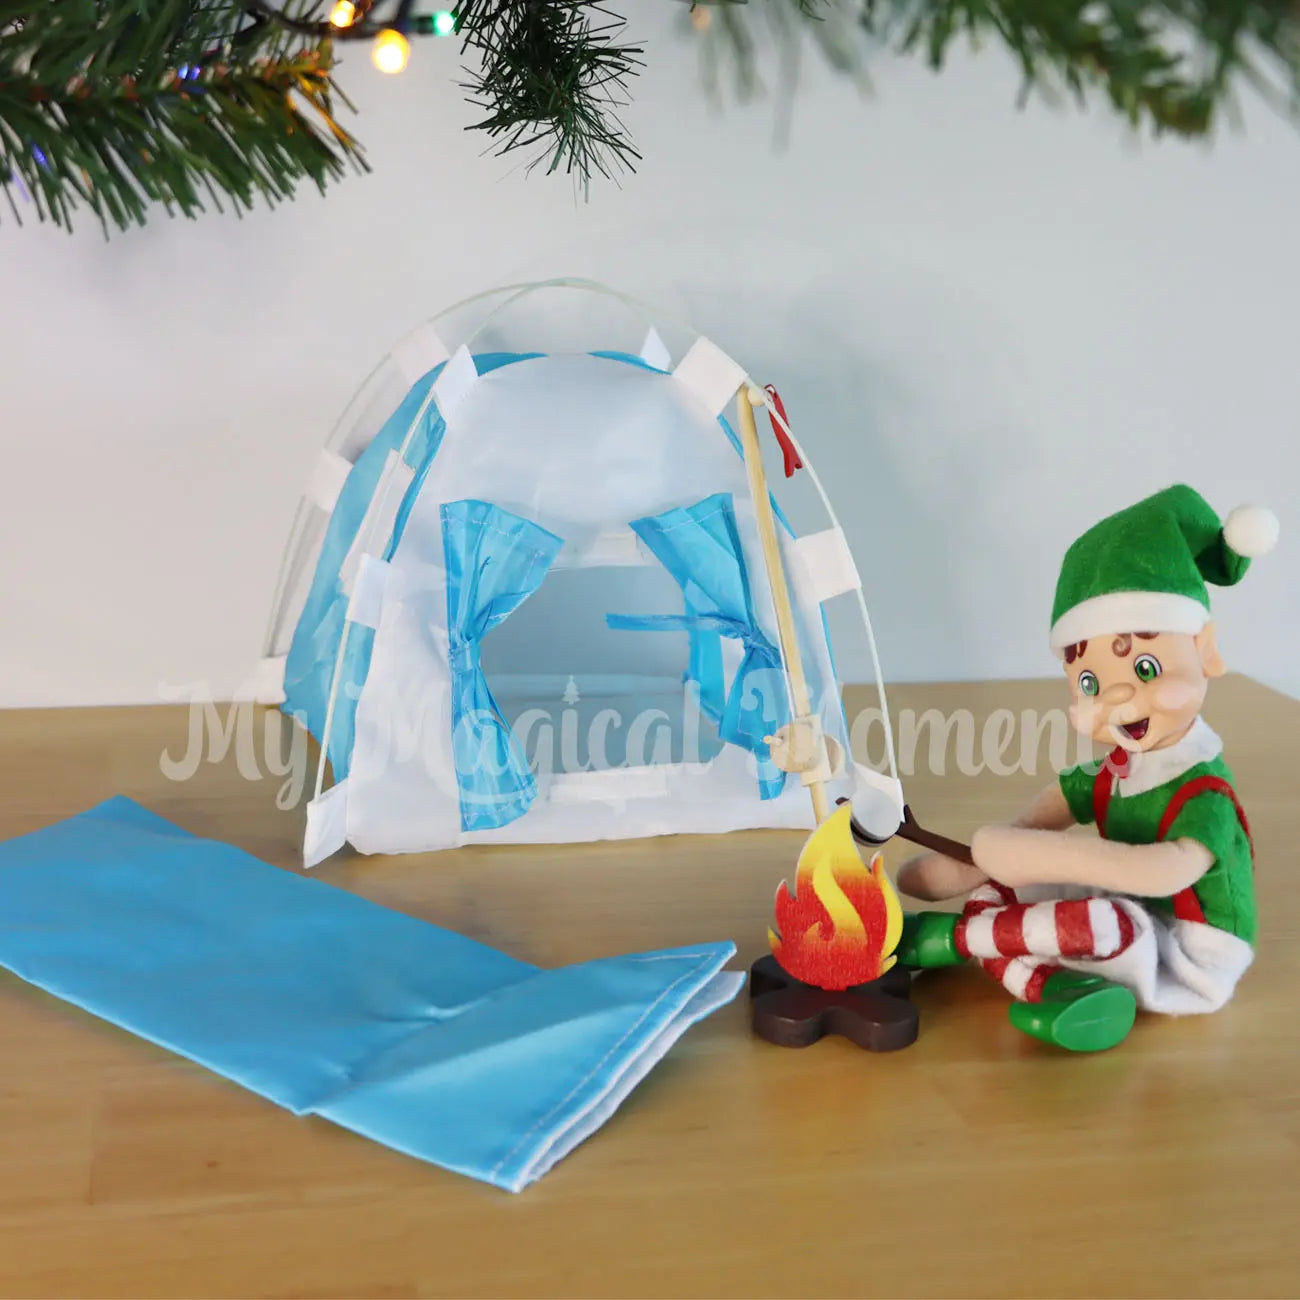 Elf sitting under the Christmas tree toasting Marshmallows with their mini camping set